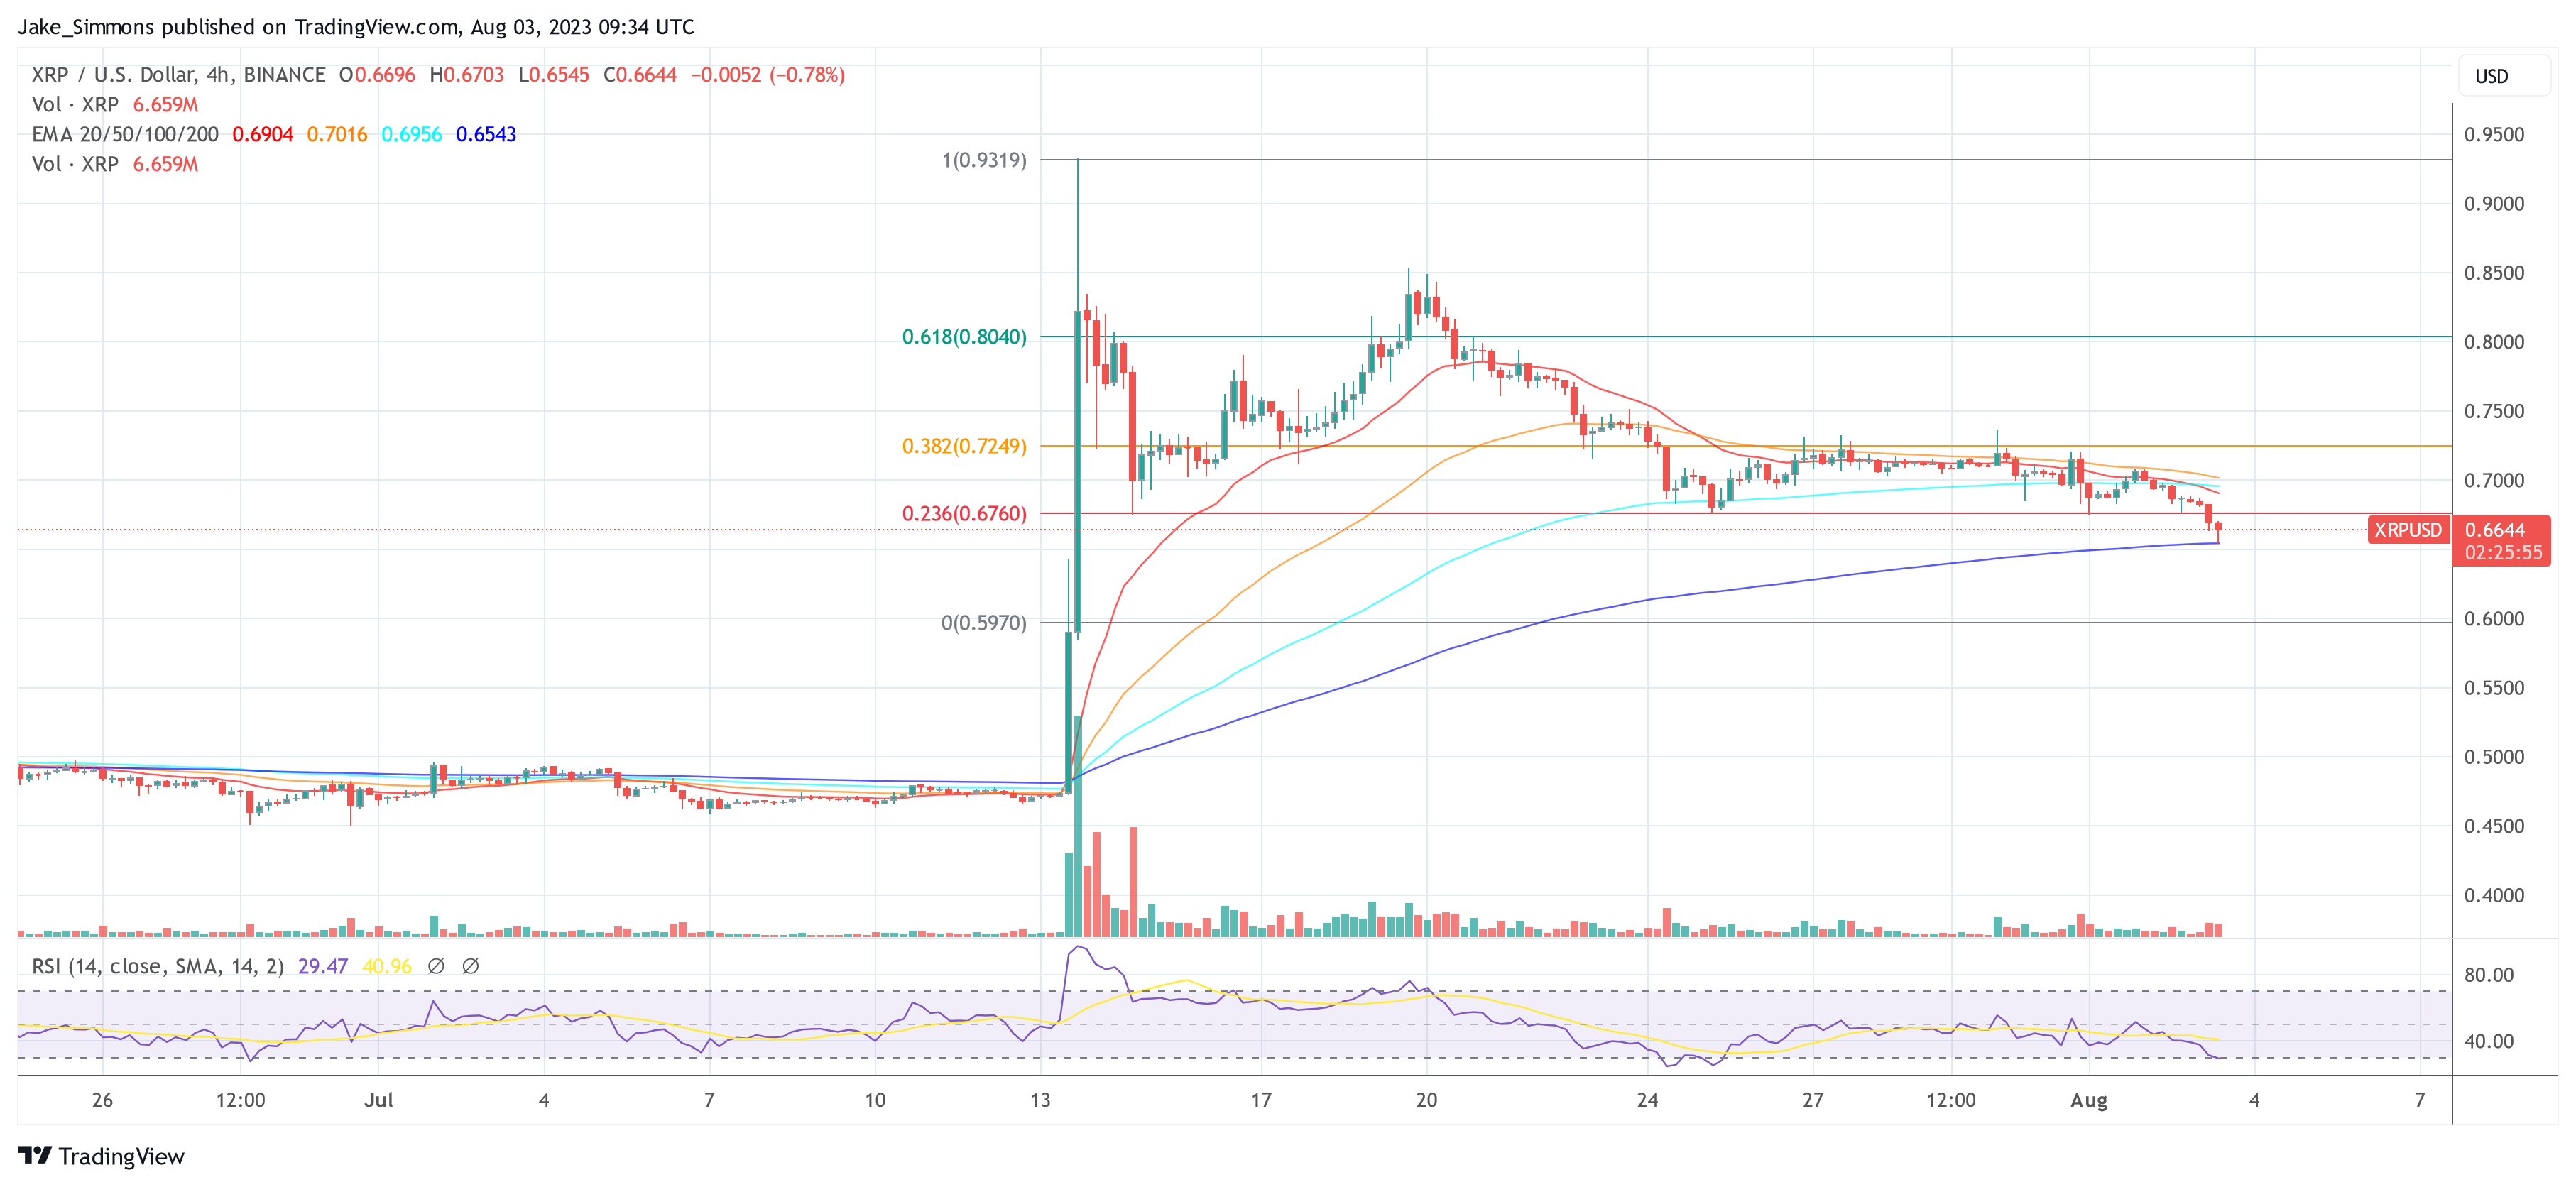 XRP price defends 200 EMA, 4-hour chart